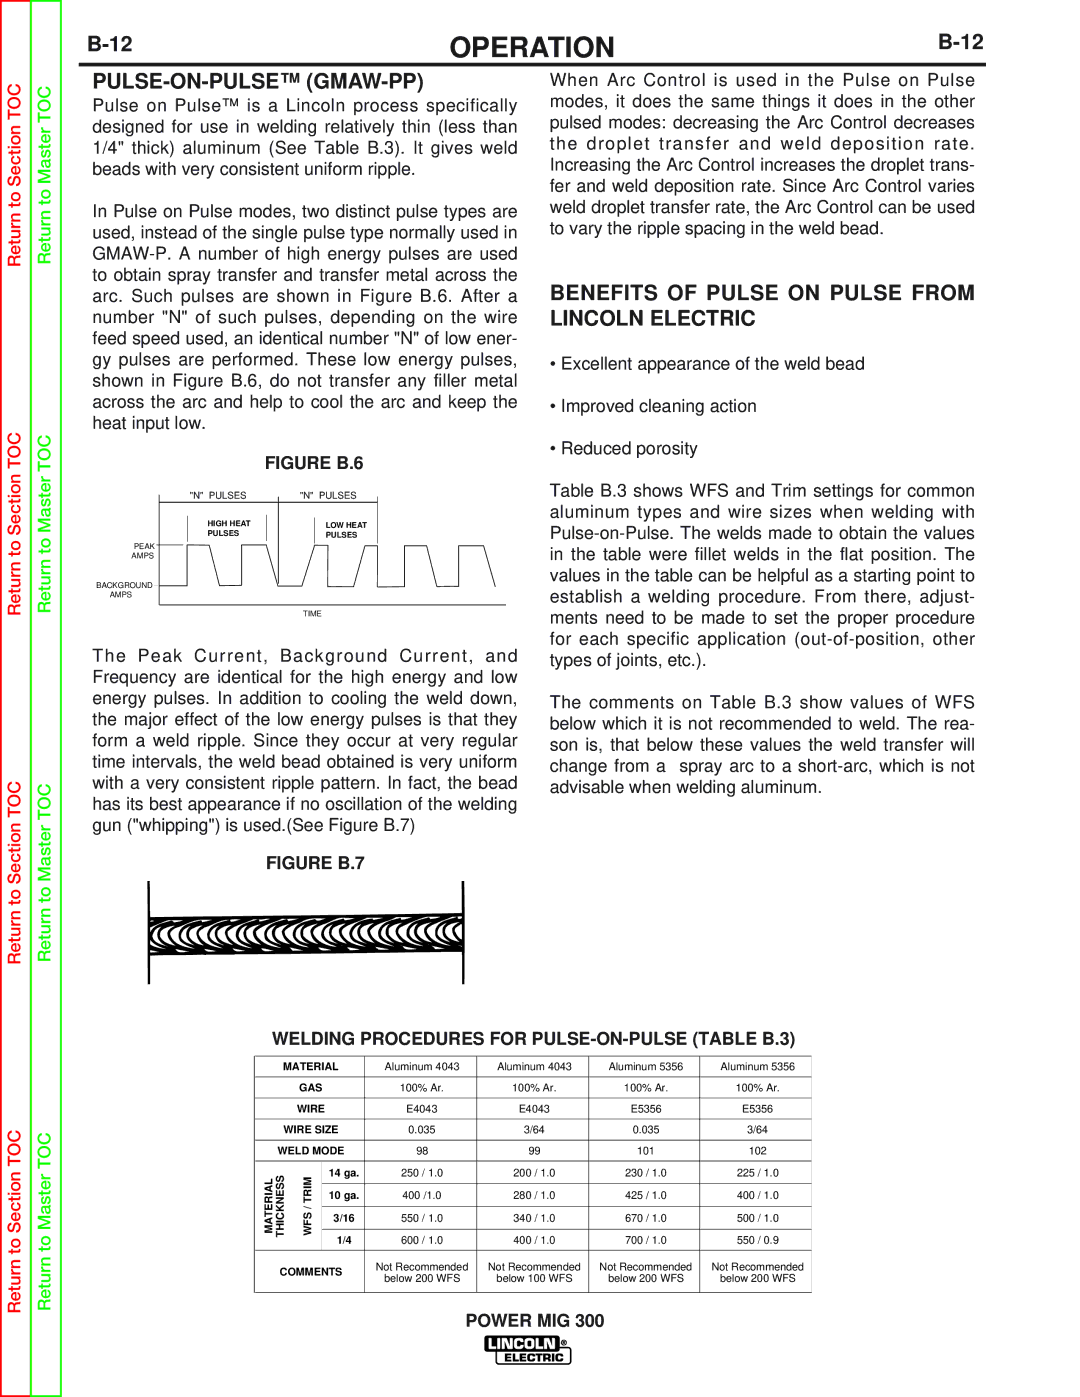 Lincoln Electric SVM160-B service manual Pulse-On-Pulse Gmaw-Pp, Benefits of Pulse on Pulse from Lincoln Electric 